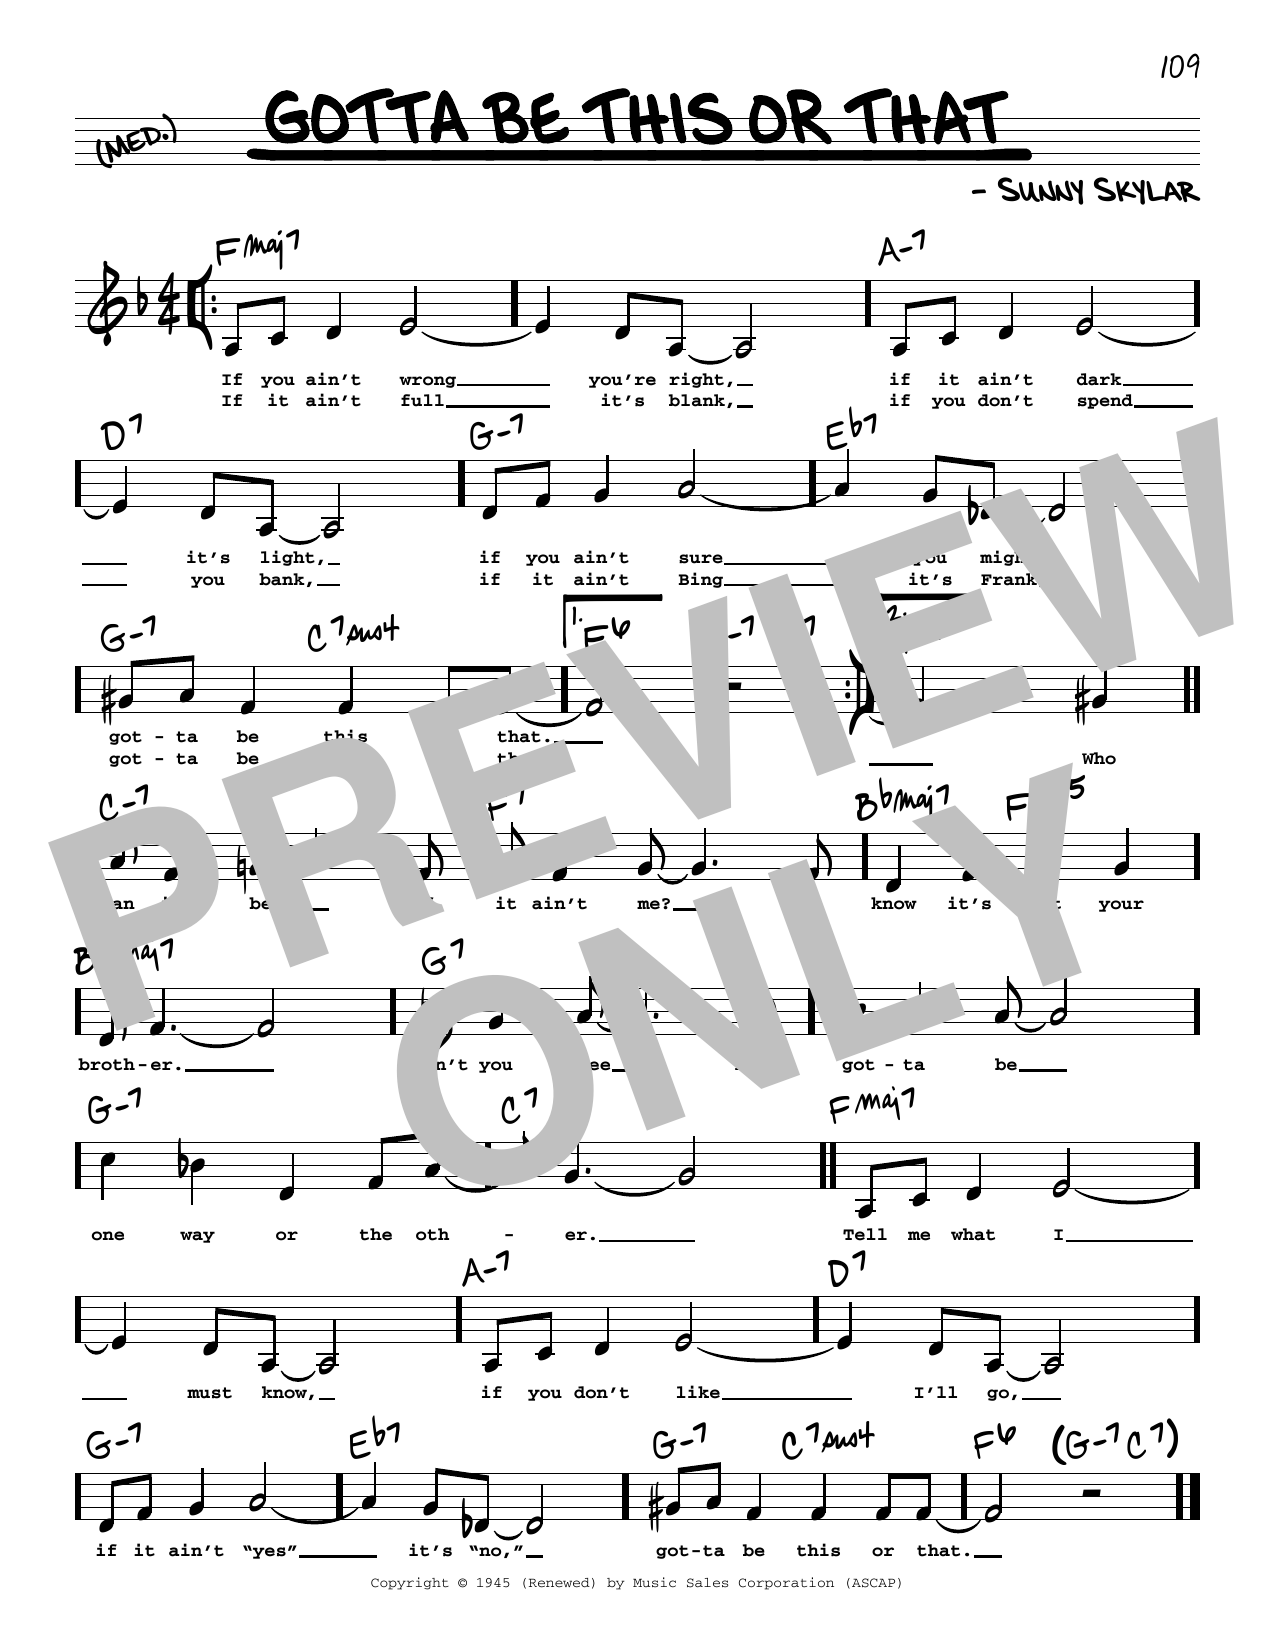 Benny Goodman and His Orchestra Gotta Be This Or That (Low Voice) sheet music notes printable PDF score